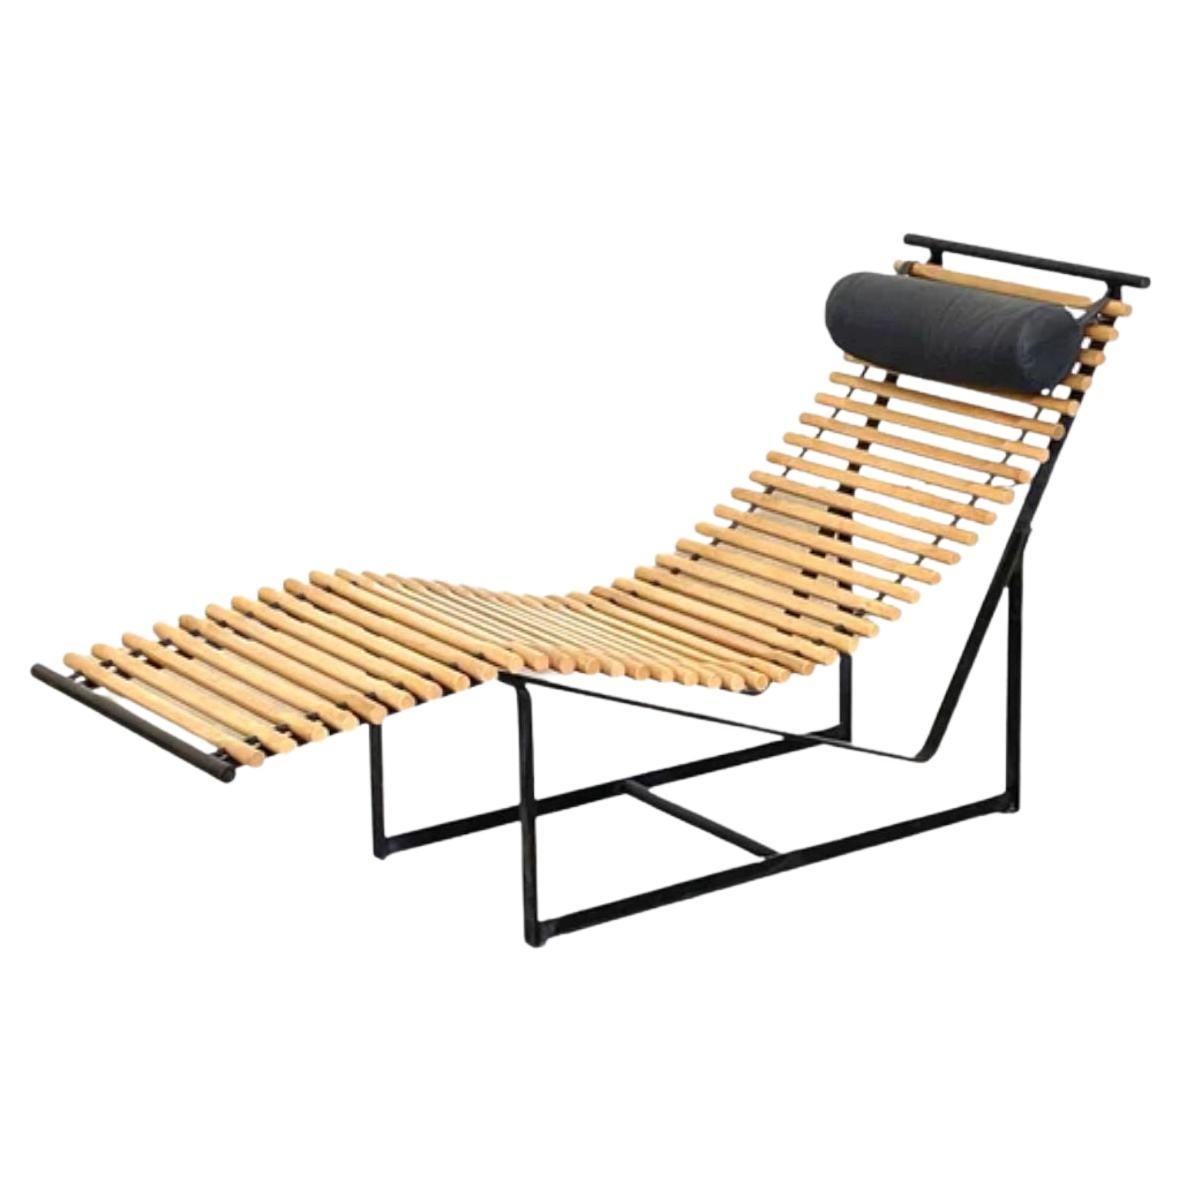 Sculptural Chaise Lounge Chair by Peter Strassl, 1978 For Sale